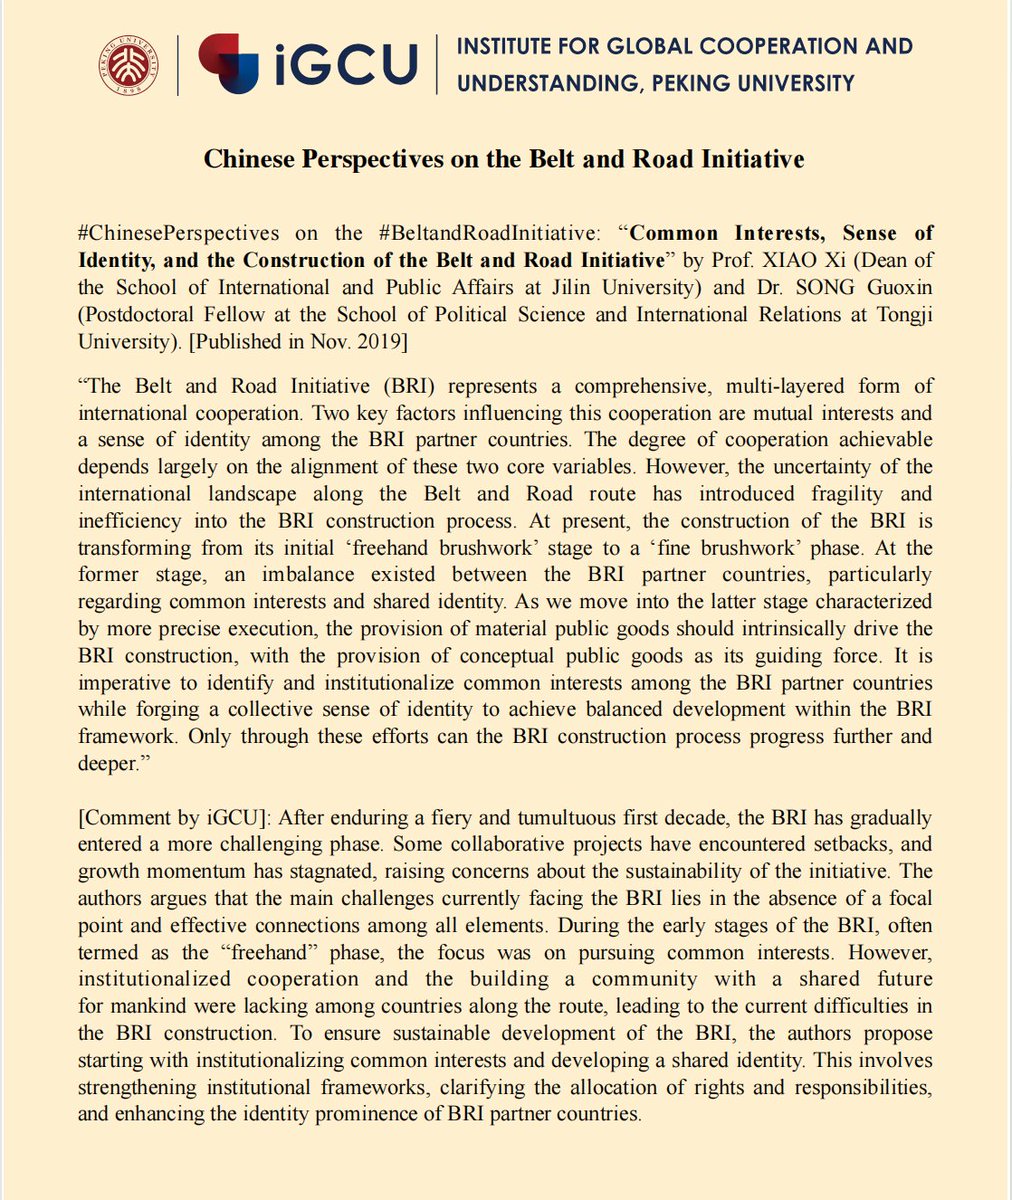 How can we ensure the sustainability of the BRI construction, and what challenges hinder international cooperation among the BRI partner countries? Check out this piece by Prof. XIAO Xi and Dr. SONG Guoxin to learn more! #ChinesePerspectives on the #BeltandRoadInitiative